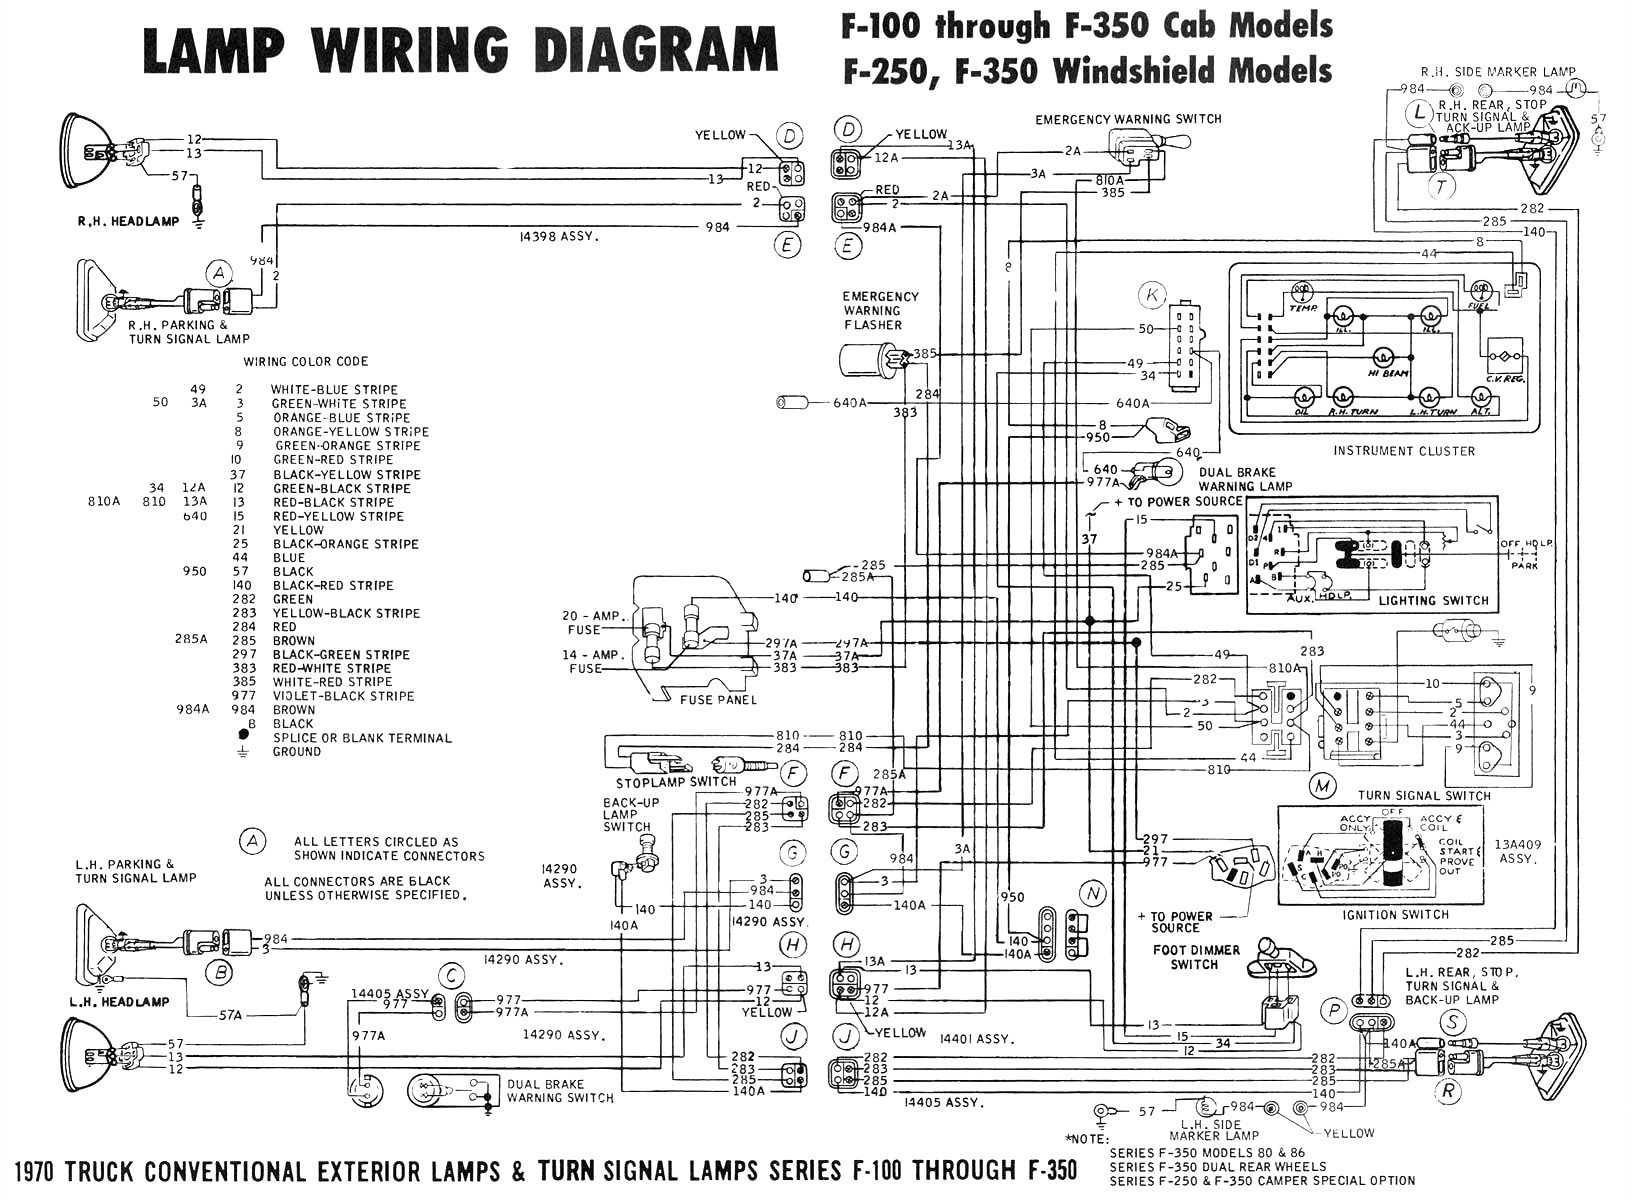 1991 ford explorer xlt fuse diagram wiring diagram used 1991 ford f150 fuse box location wiring